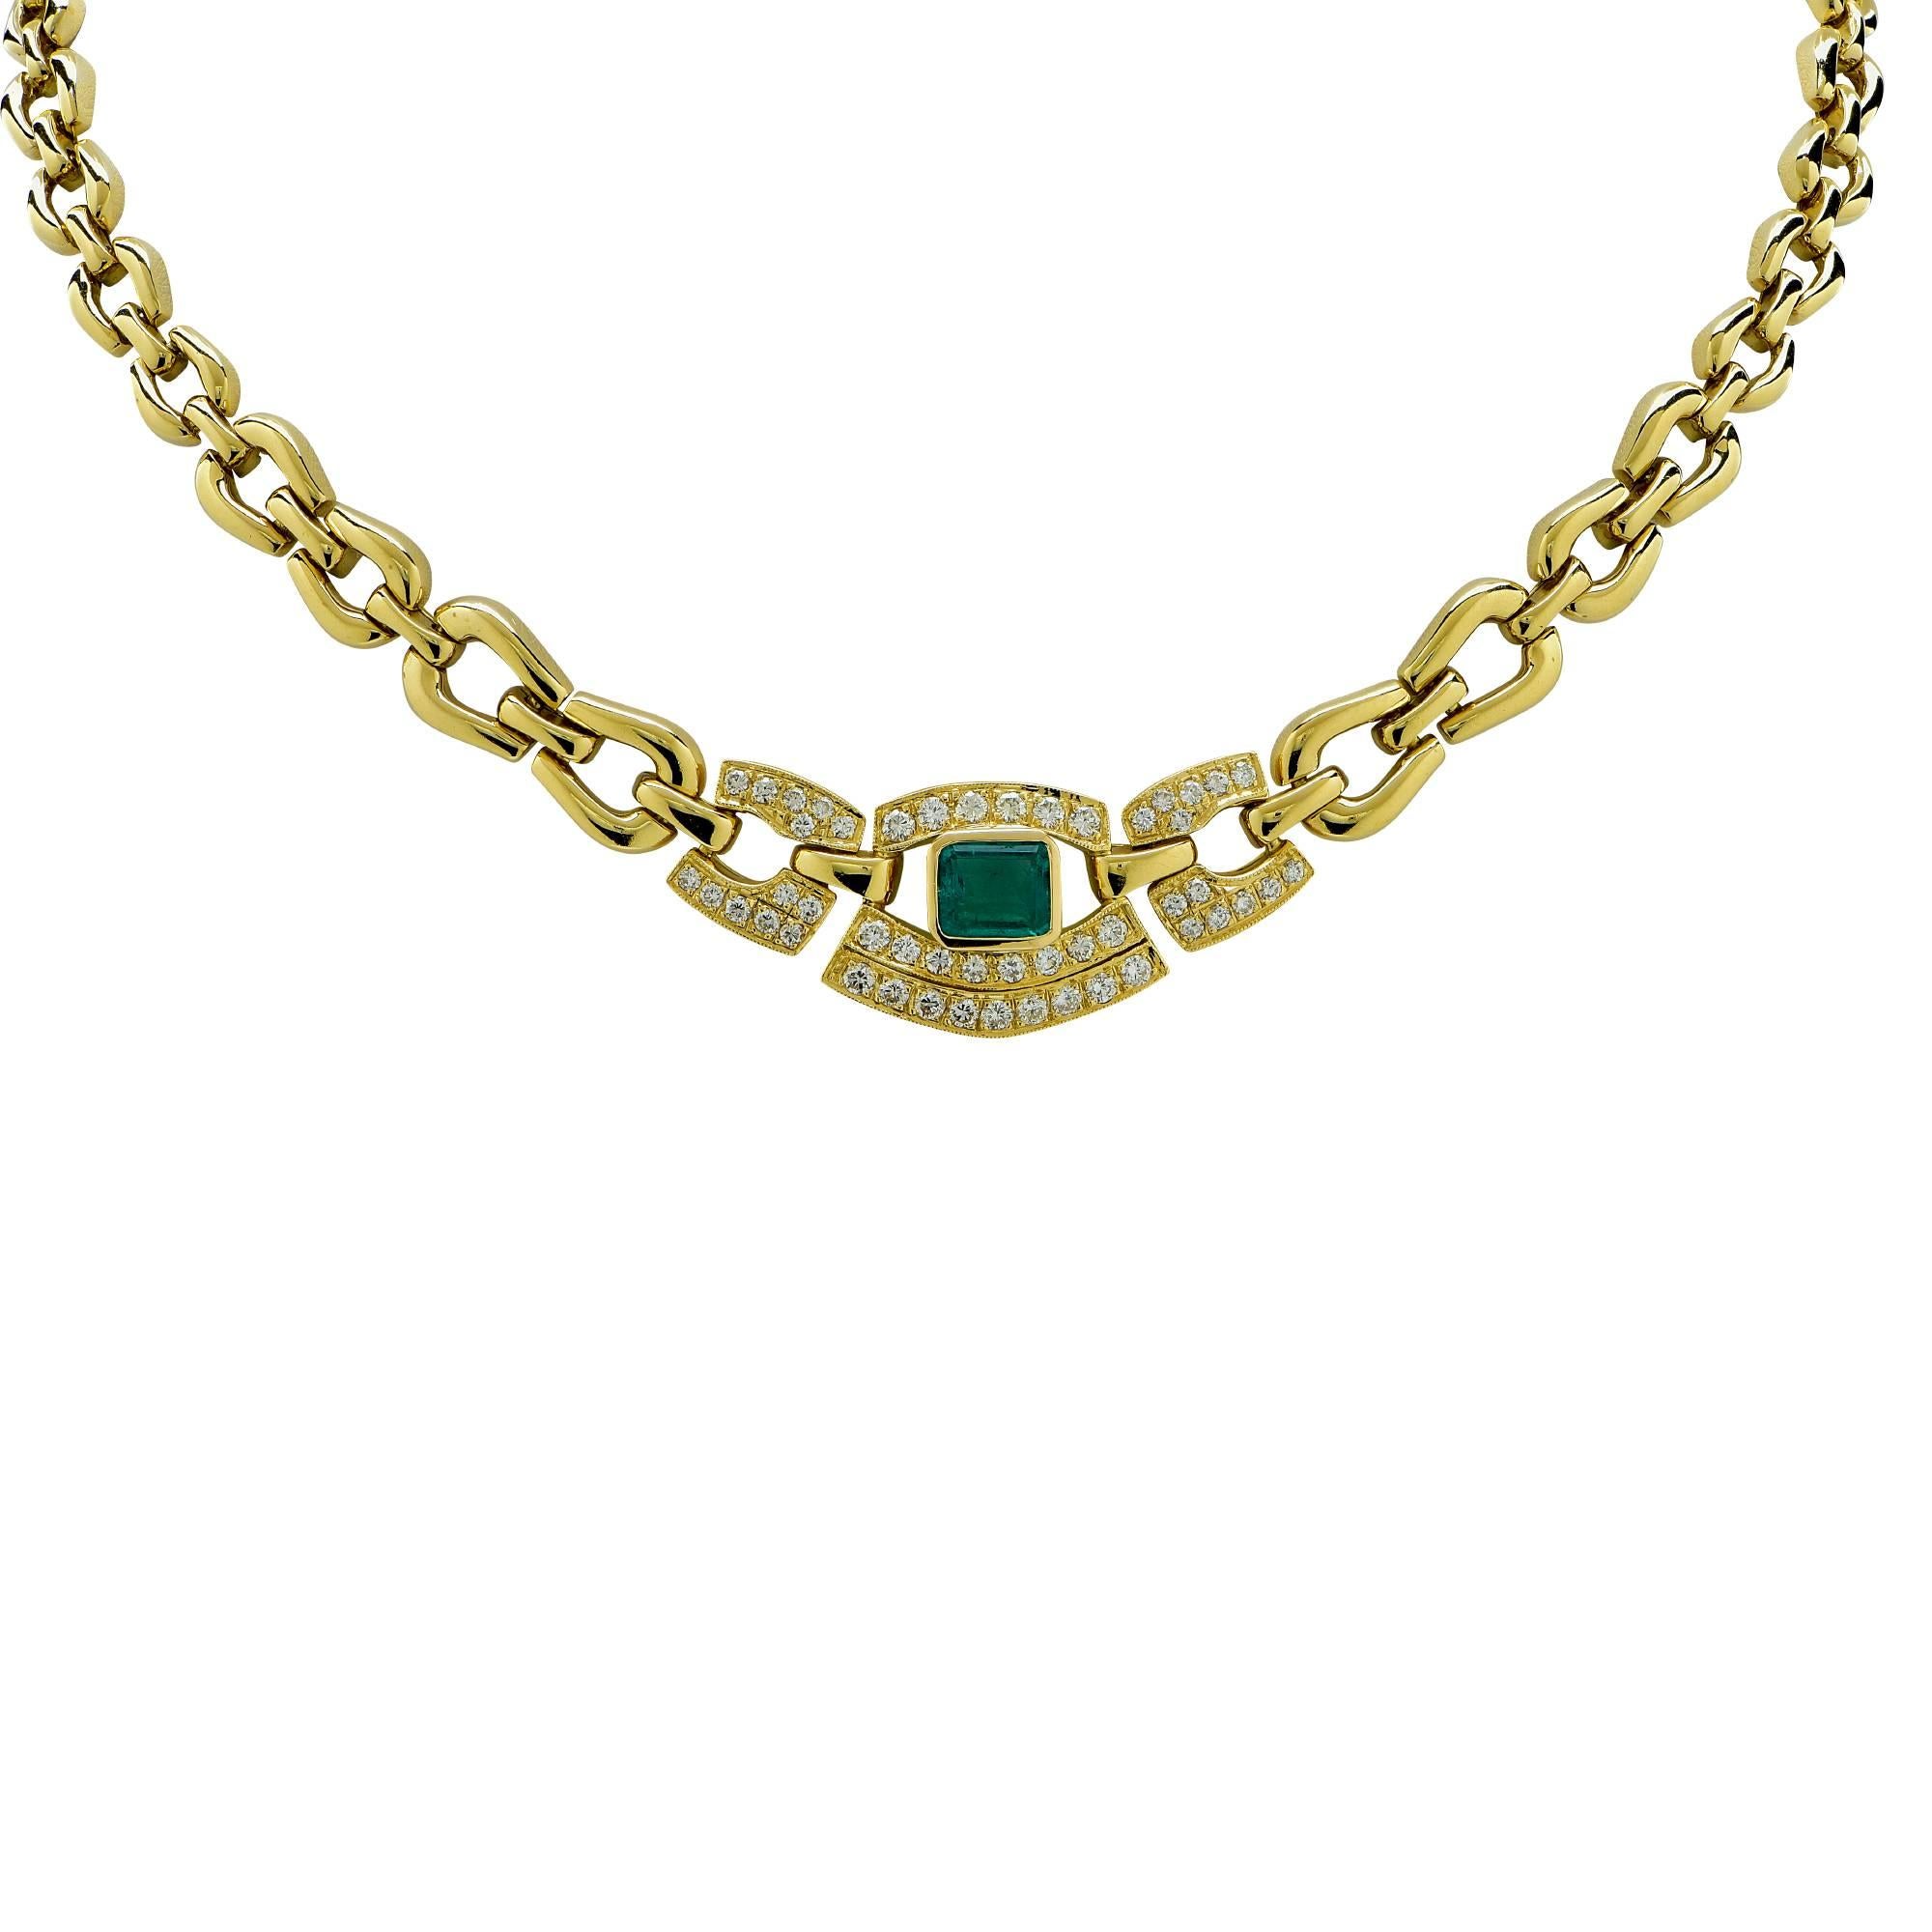 18k yellow gold necklace featuring a Colombian Emerald weighing approximately 1.5cts accented by 49 round brilliant cut diamonds weighing approximately .90cts total, G color VS clarity.

The necklace measures 
It is stamped and tested as 18k